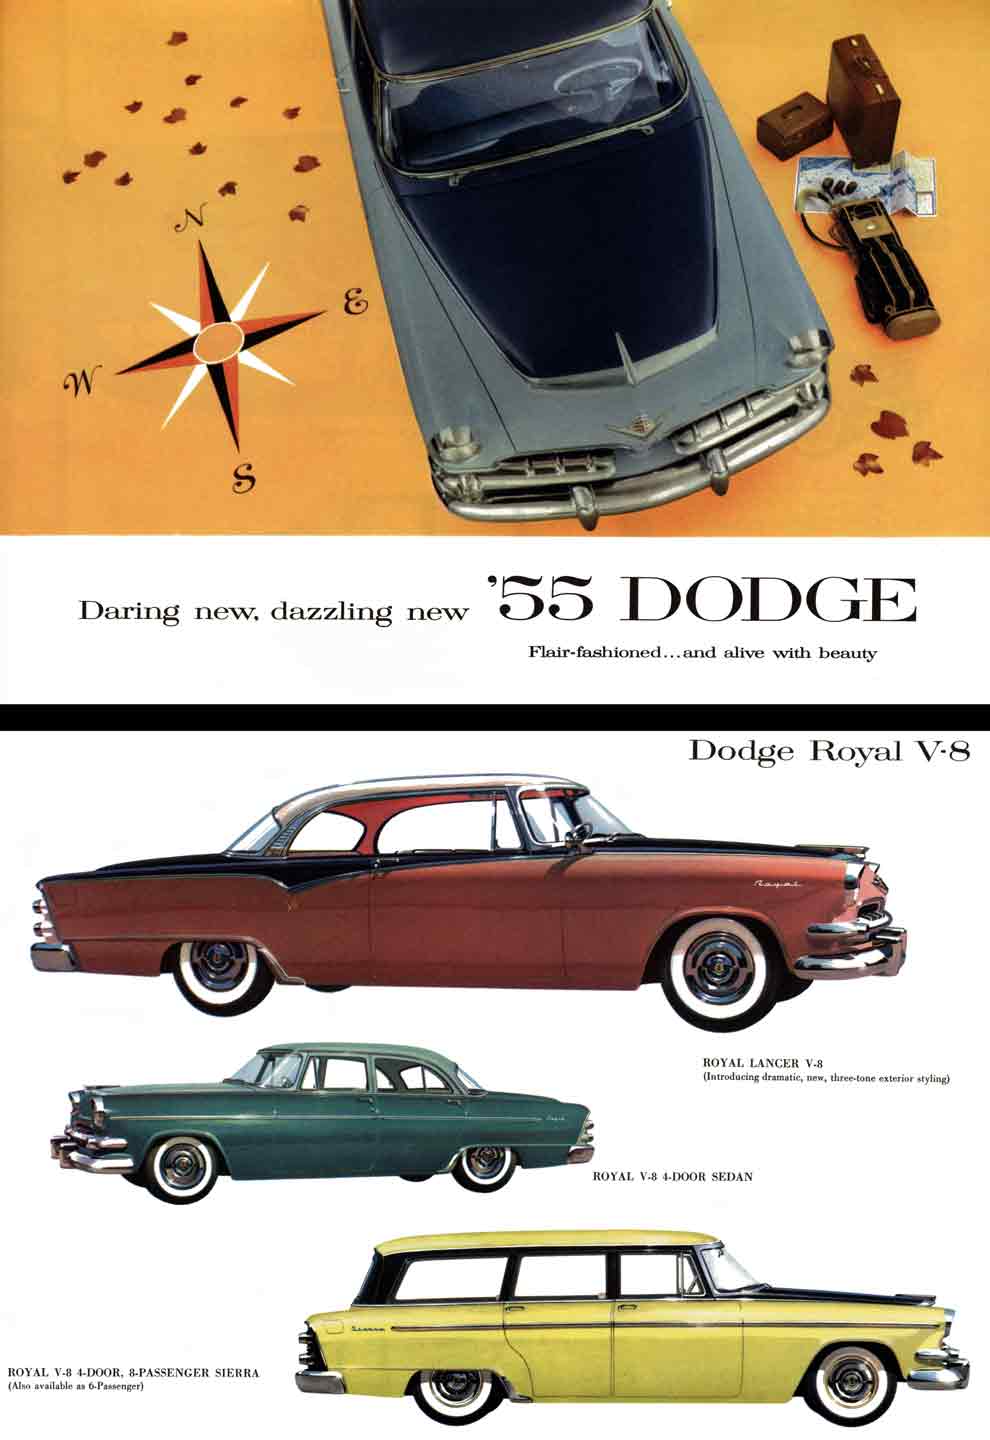 Dodge 1955 - Daring new, dazzling new '55 Dodge - Flair-fashioned and alive with beauty